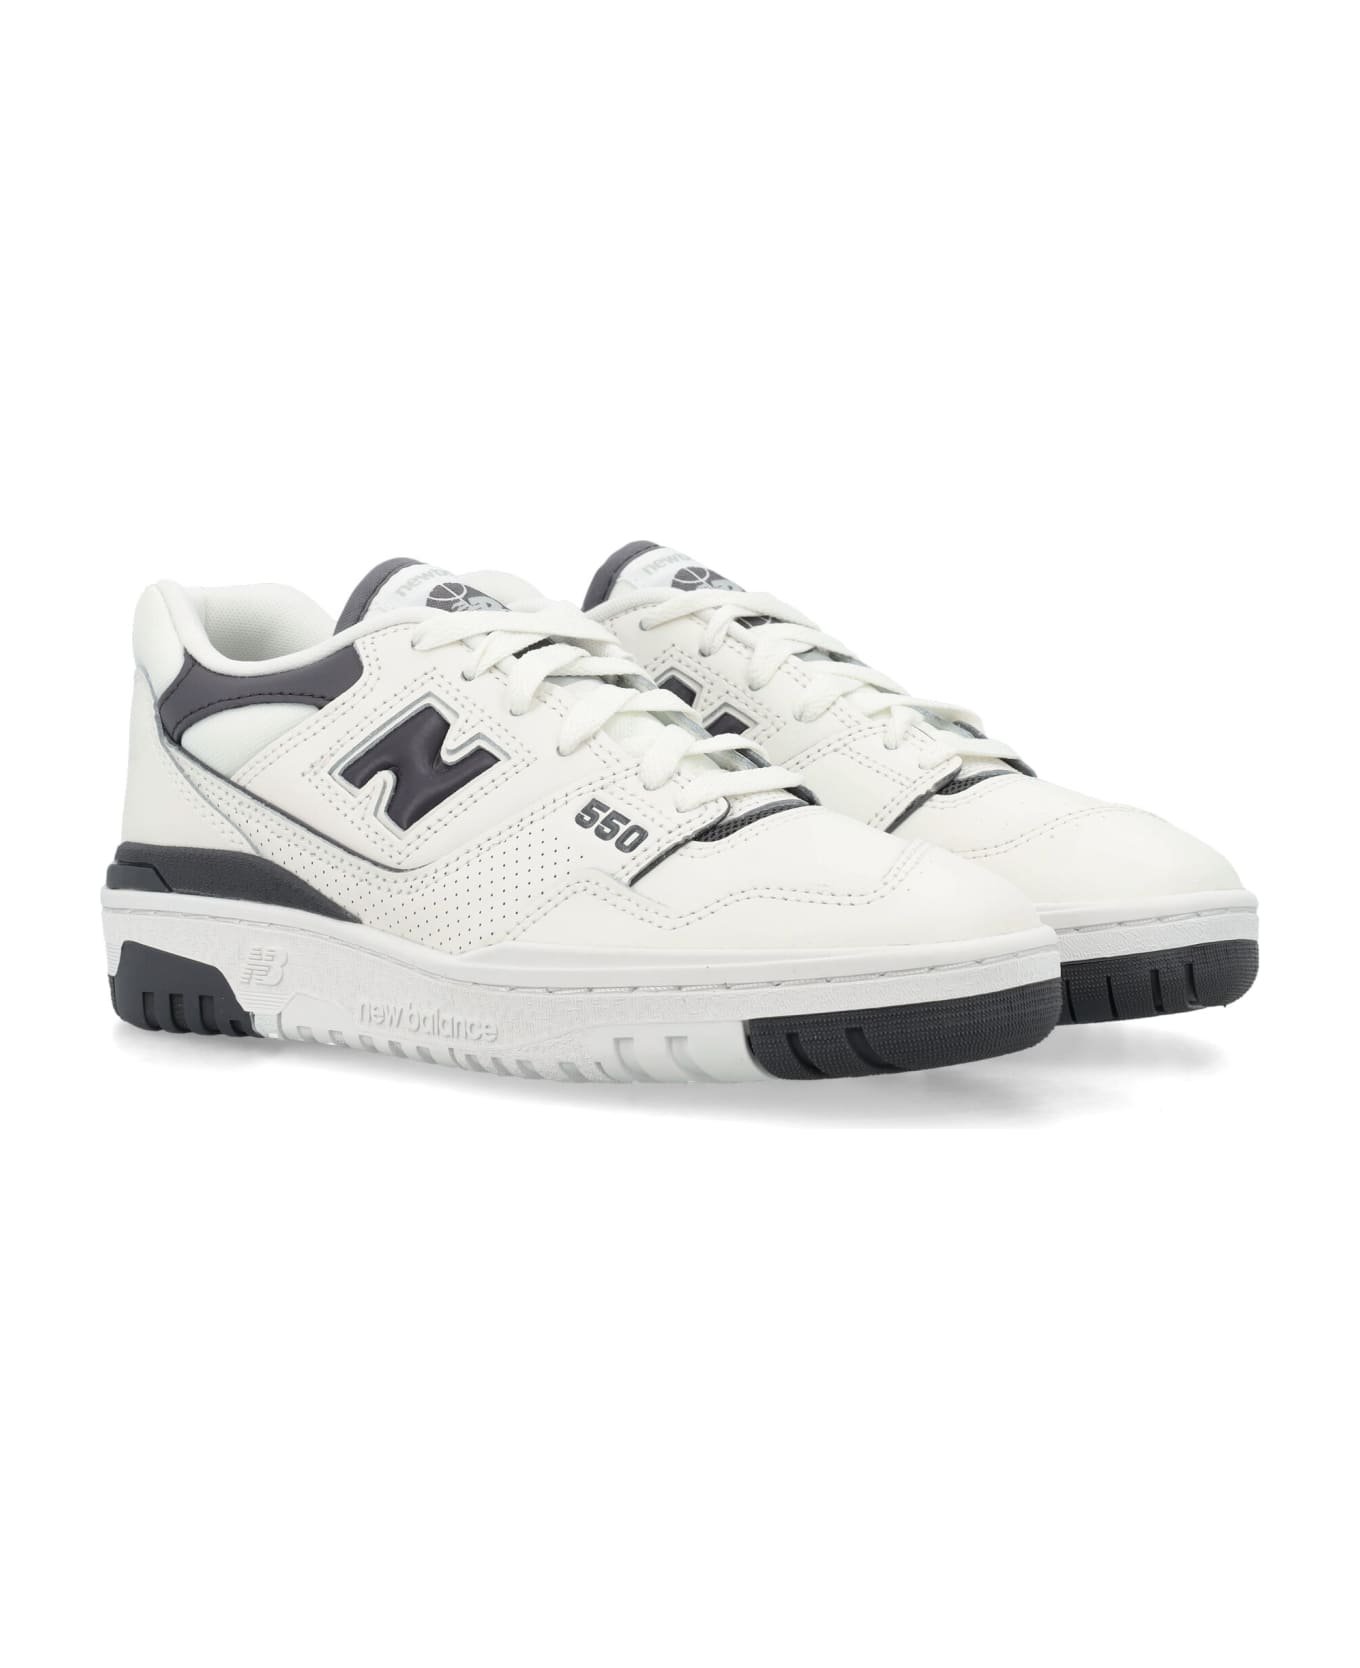 New Balance 550 Woman's Sneakers - WHITE